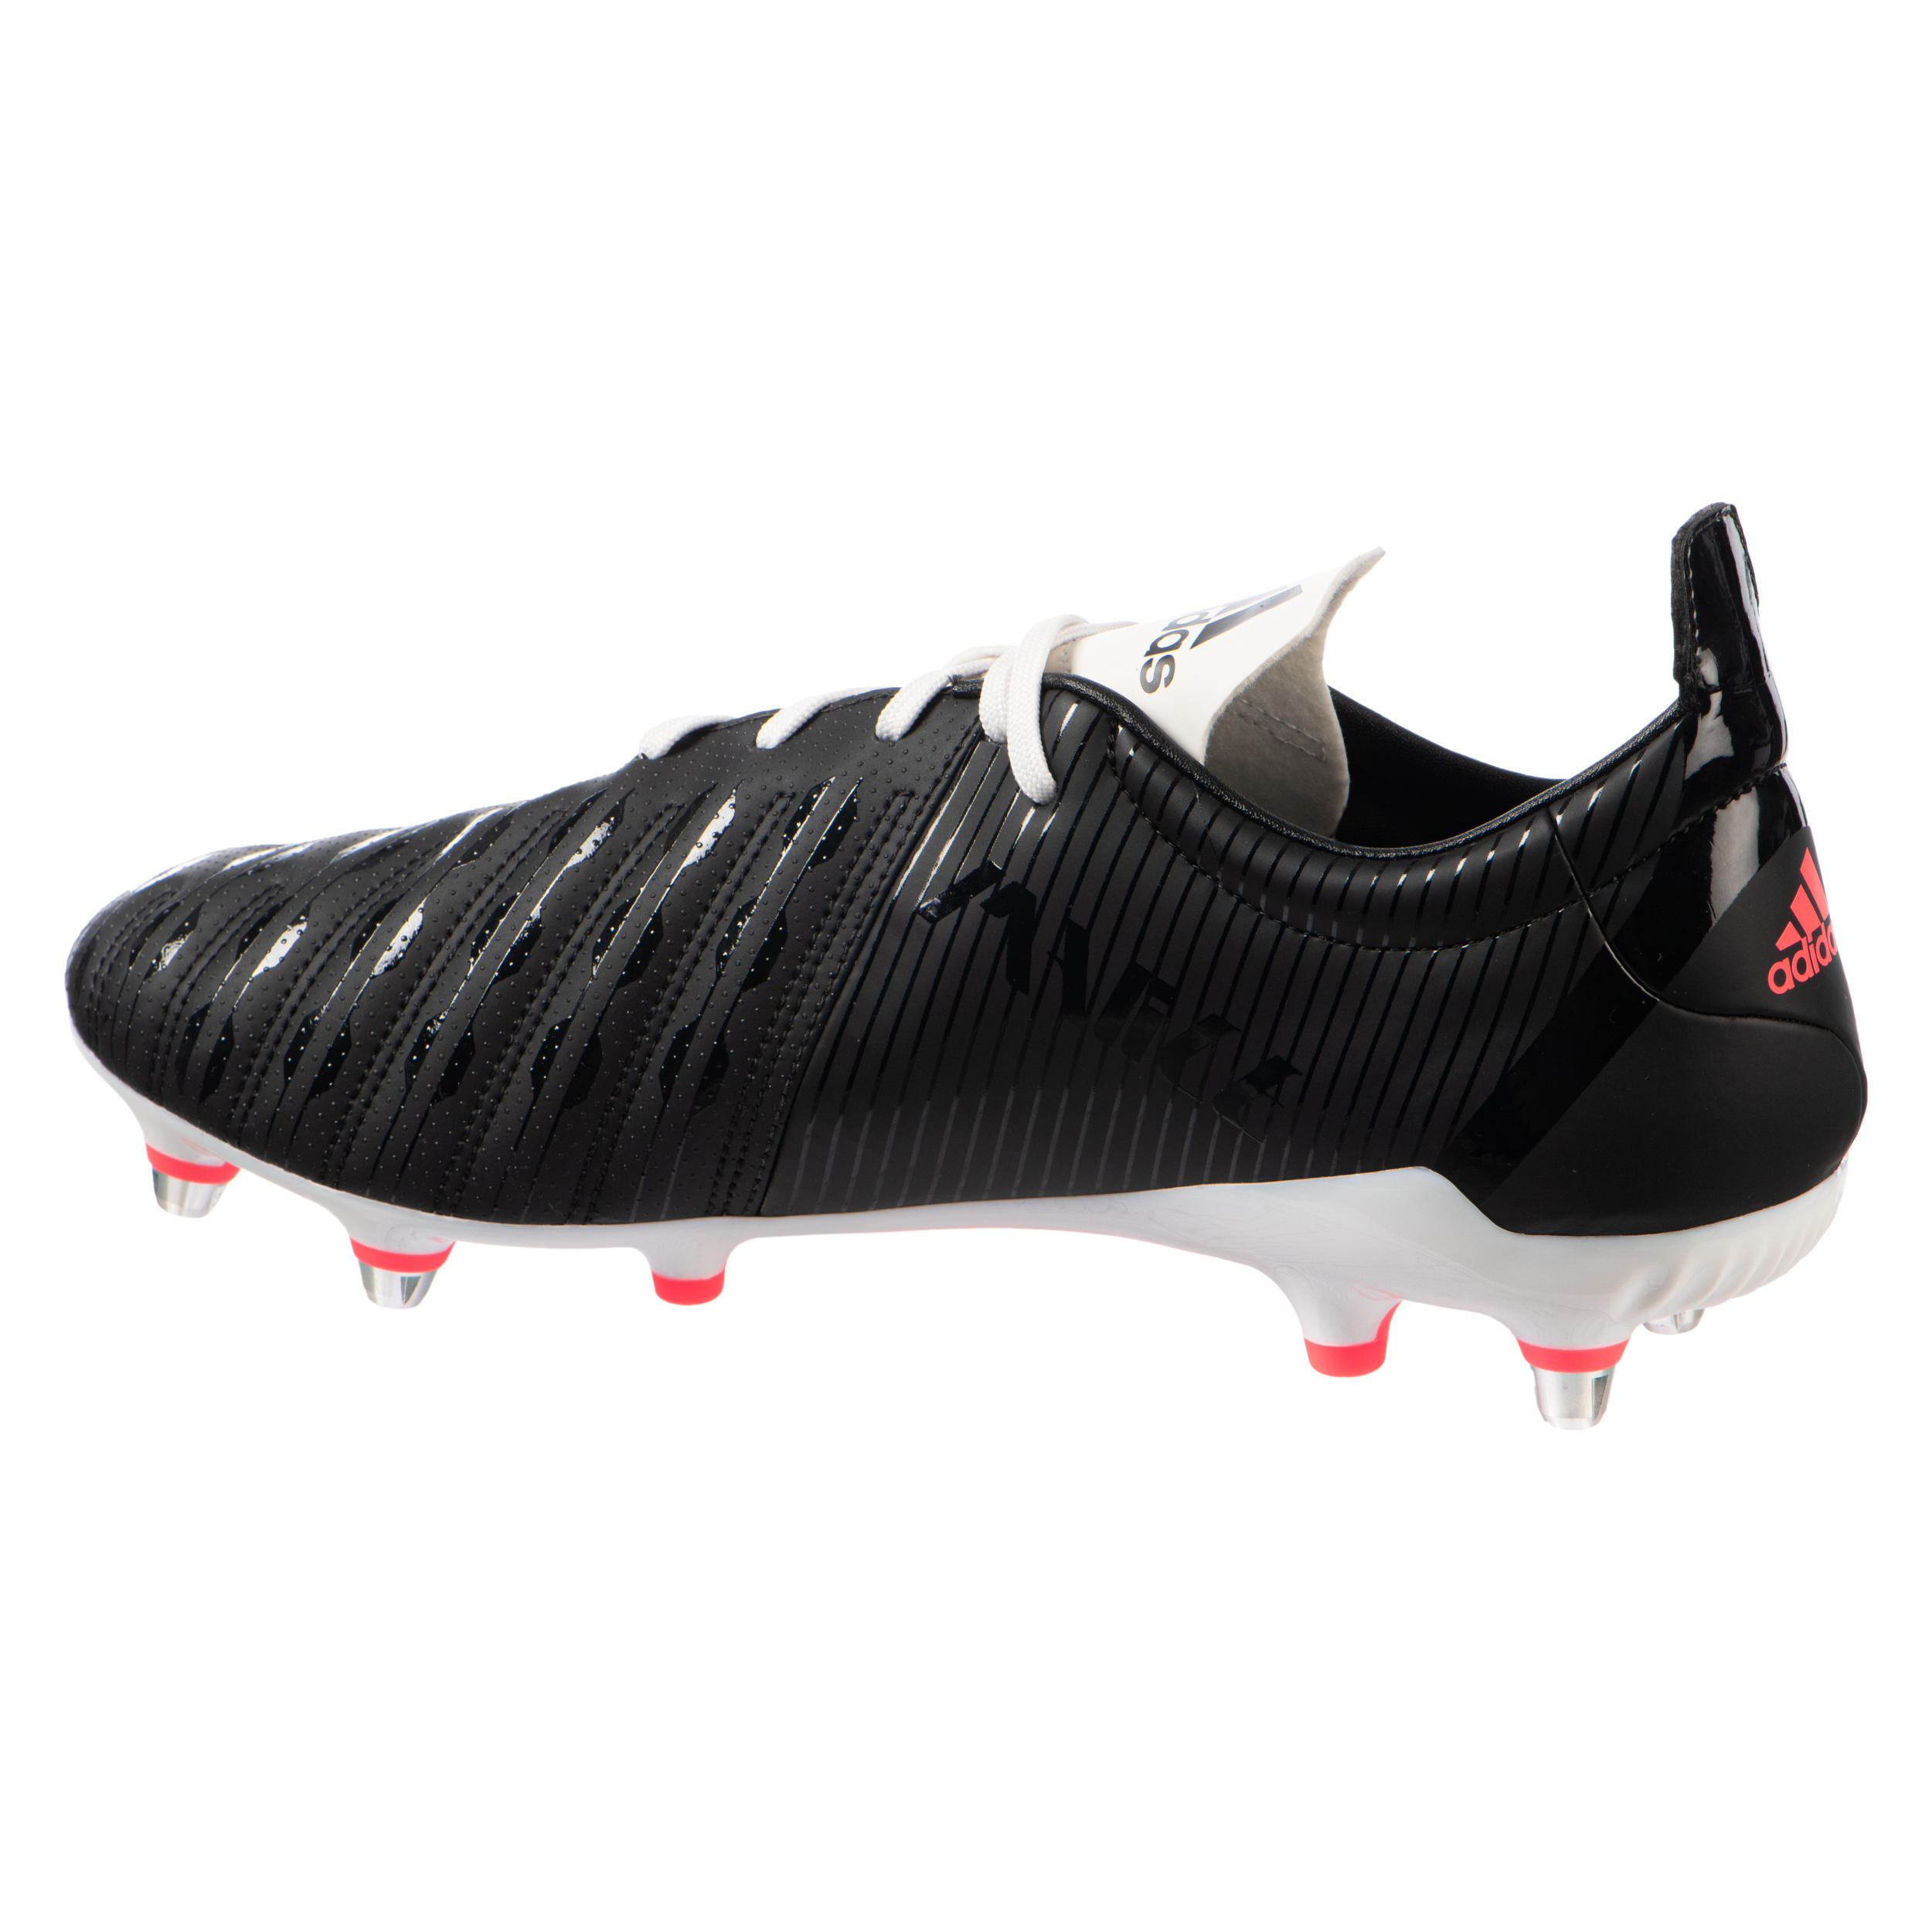 Adult Soft Pitch Screw-In Hybrid Rugby Boots Malice SG - Black 2/7